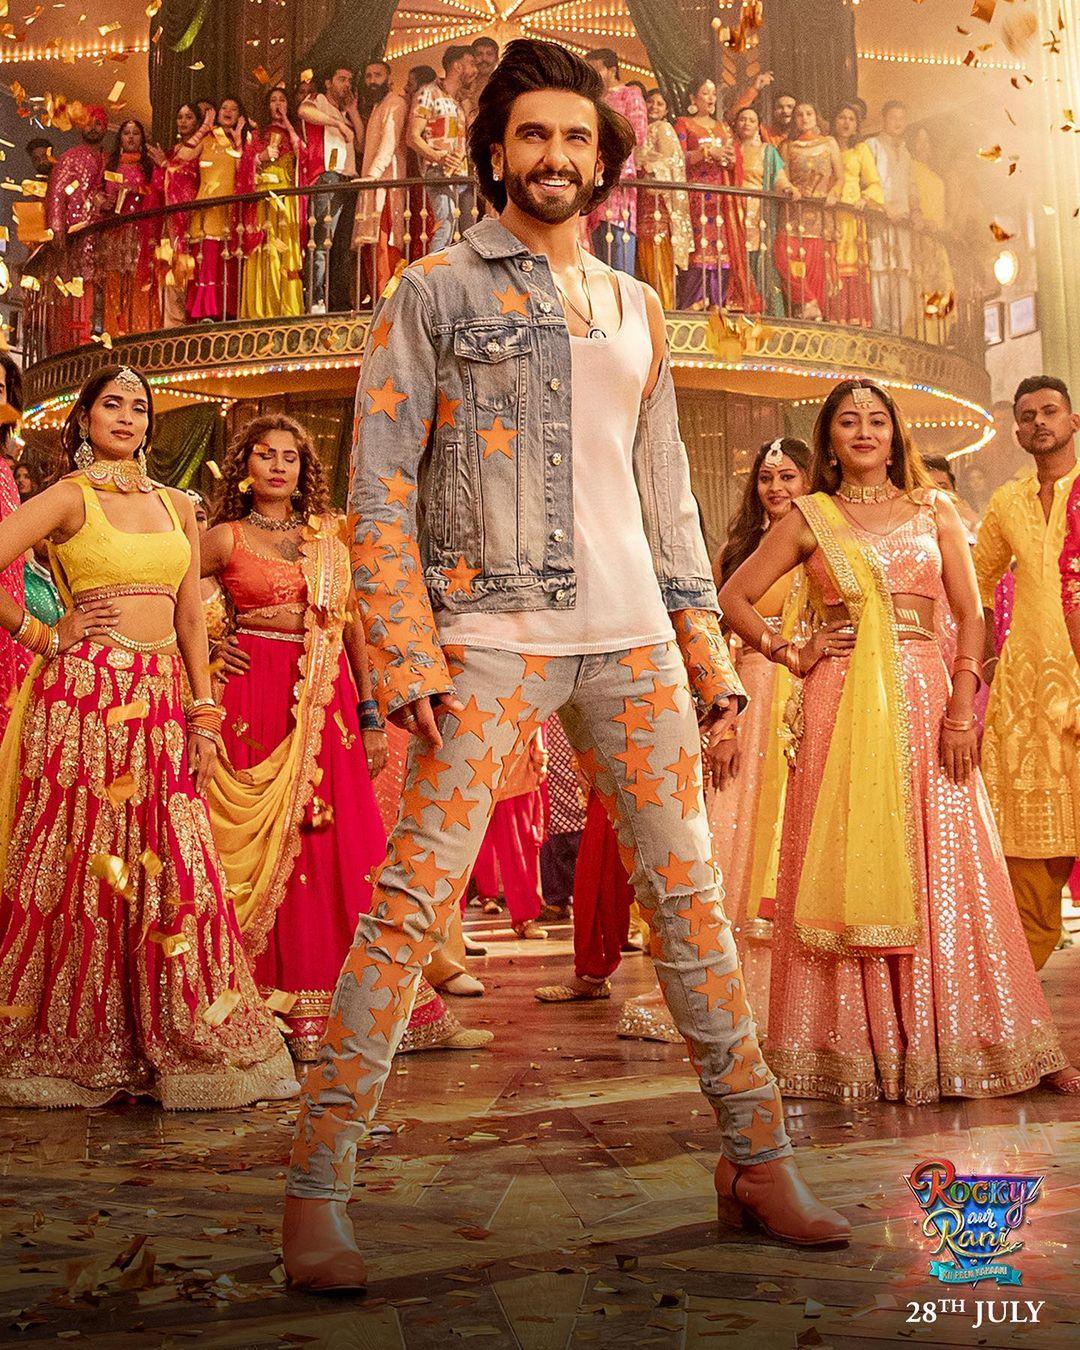 Ranveer Singh dancing, with hundreds of backup dancers, in grand sets, seems to be something we'll get to see a lot in this film